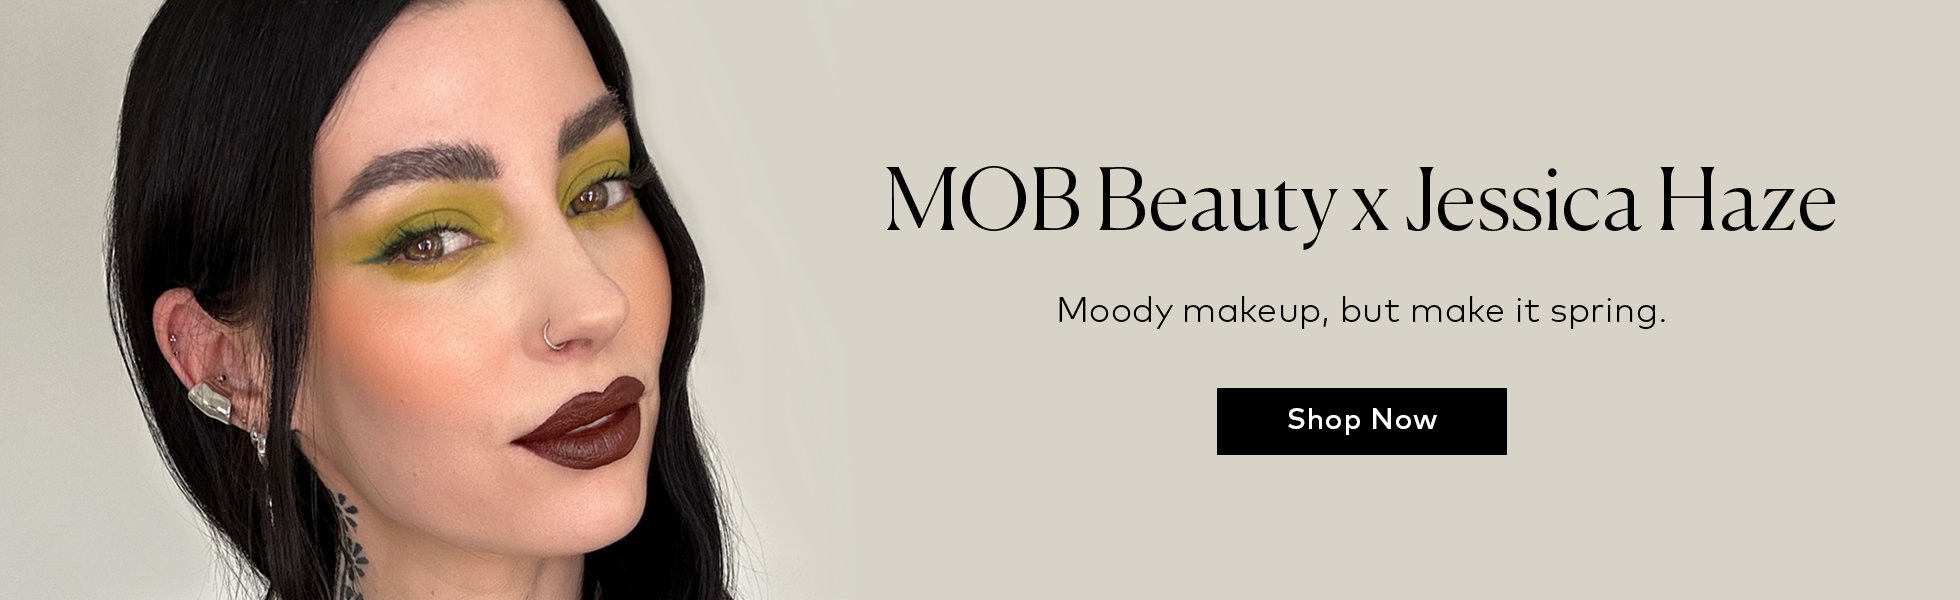 Shop the MOB Beauty Jessica Haze Spring Goth Collection at Beautylish.com